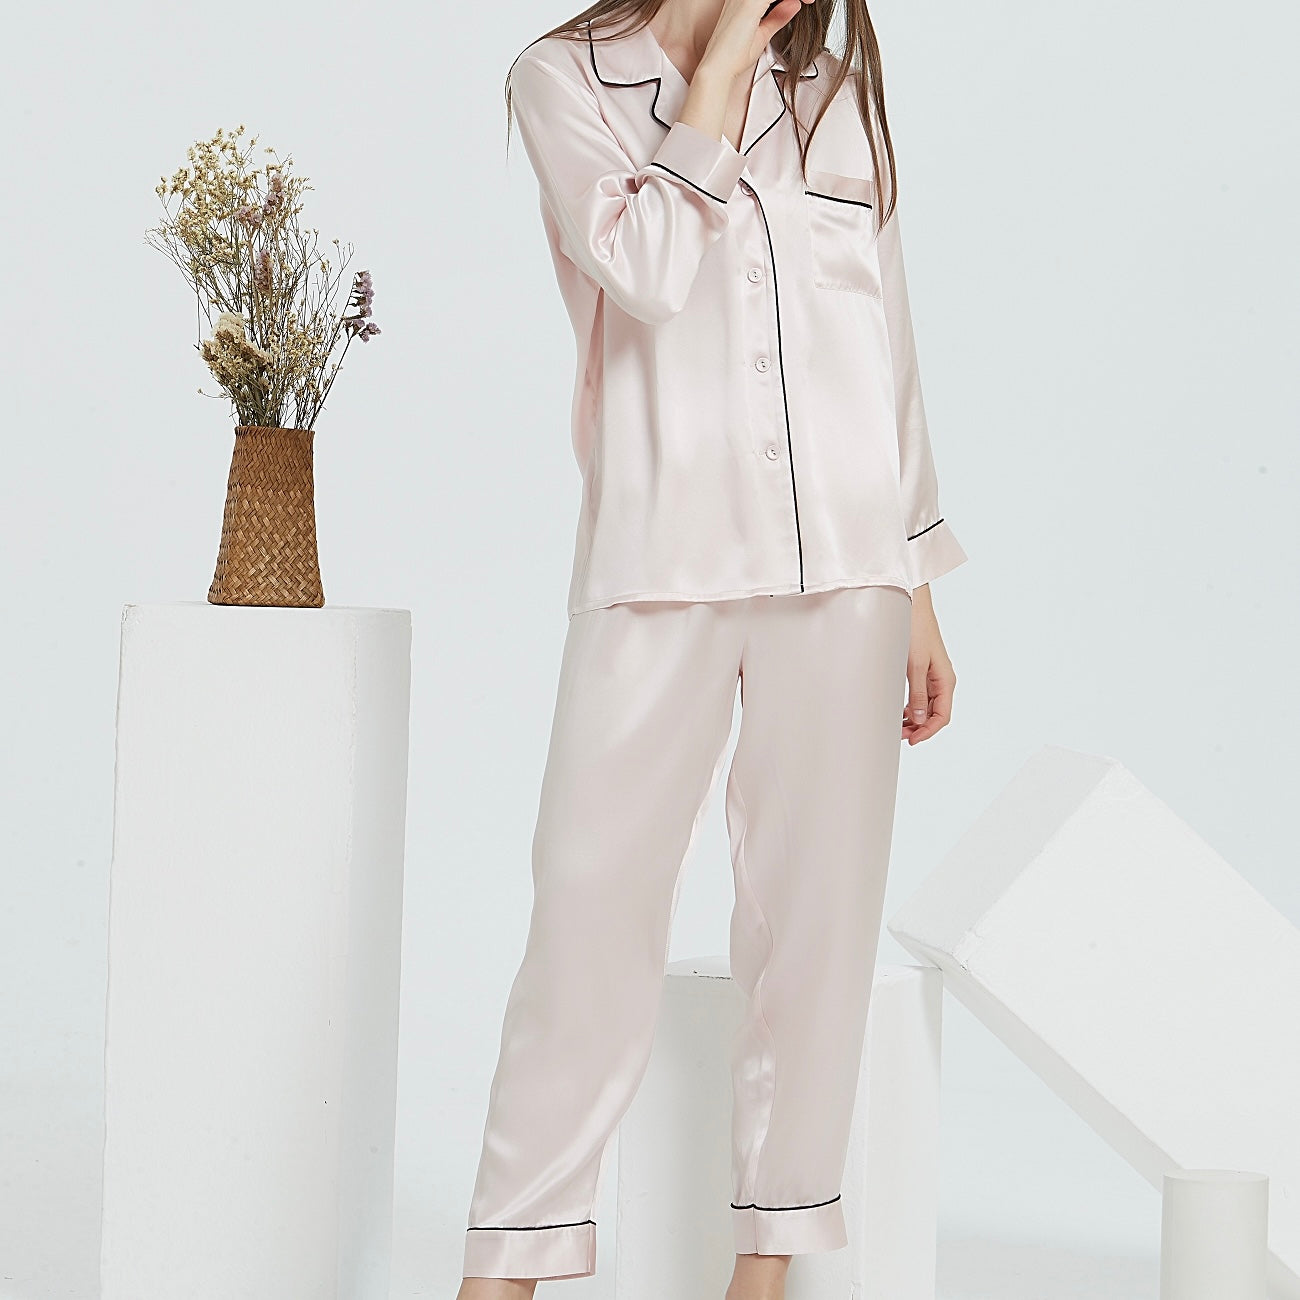 White Trousseau’s Pure Mulberry Silk Long Pyjamas Set in Pink. High quality and breathable, our silk pyjamas set will make you feel stylish while lounging at home. It is the best sleepwear for Singapore weather!